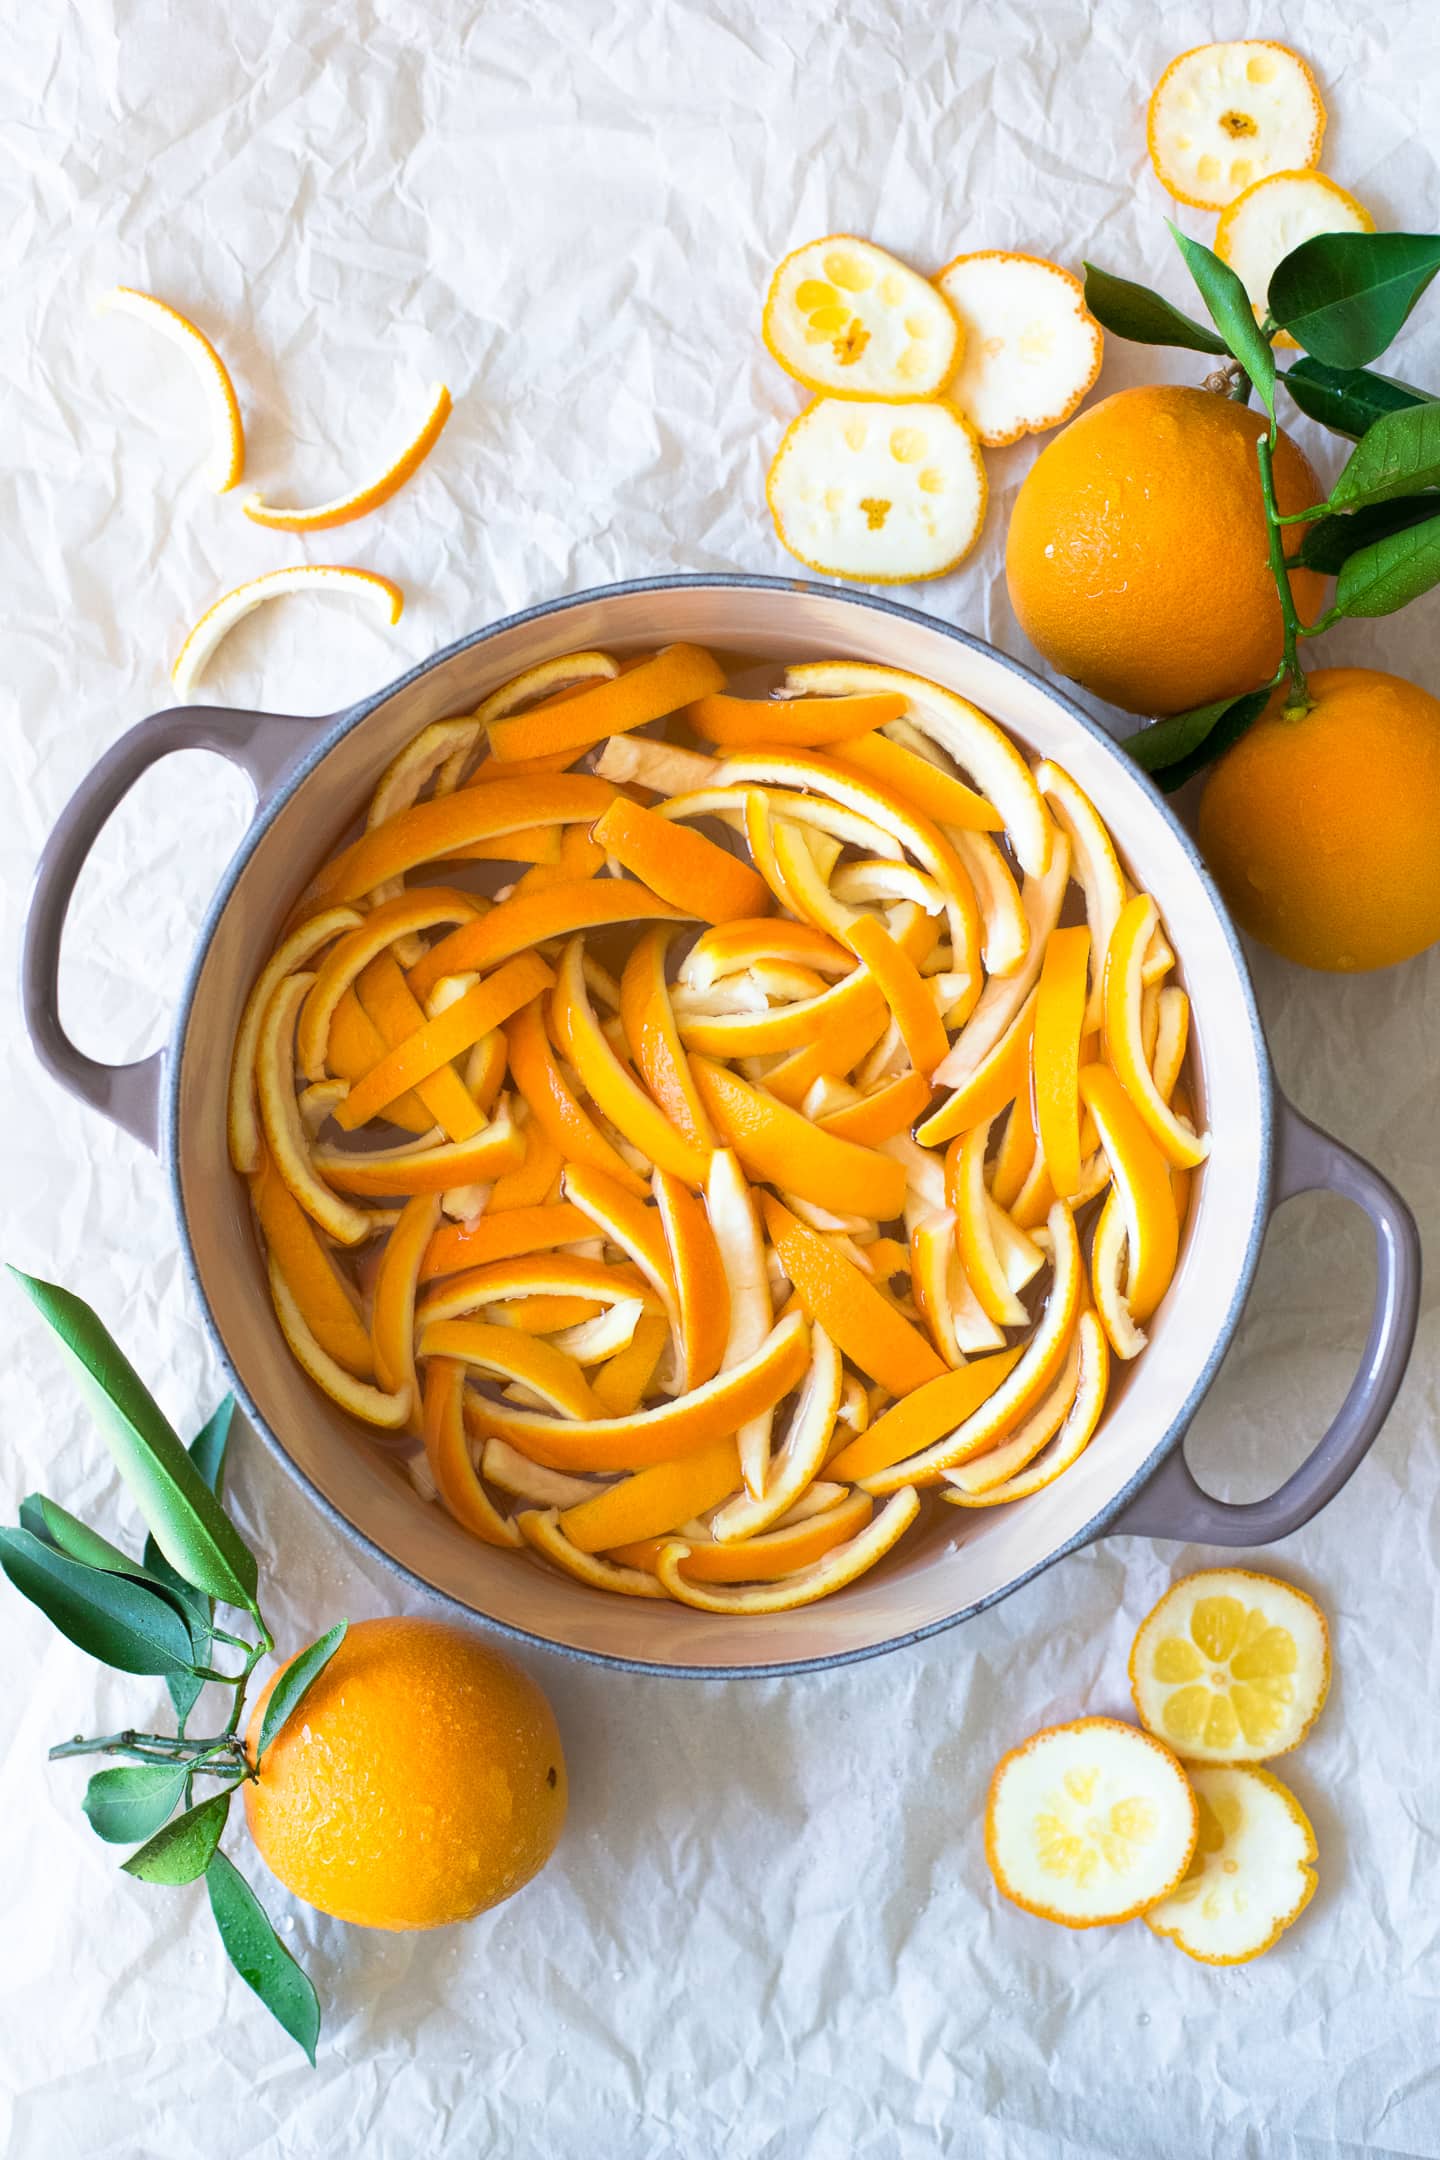 Overhead view of strips of orange peel covered with water in a pot, surrounded by more oranges and peel cuttings.